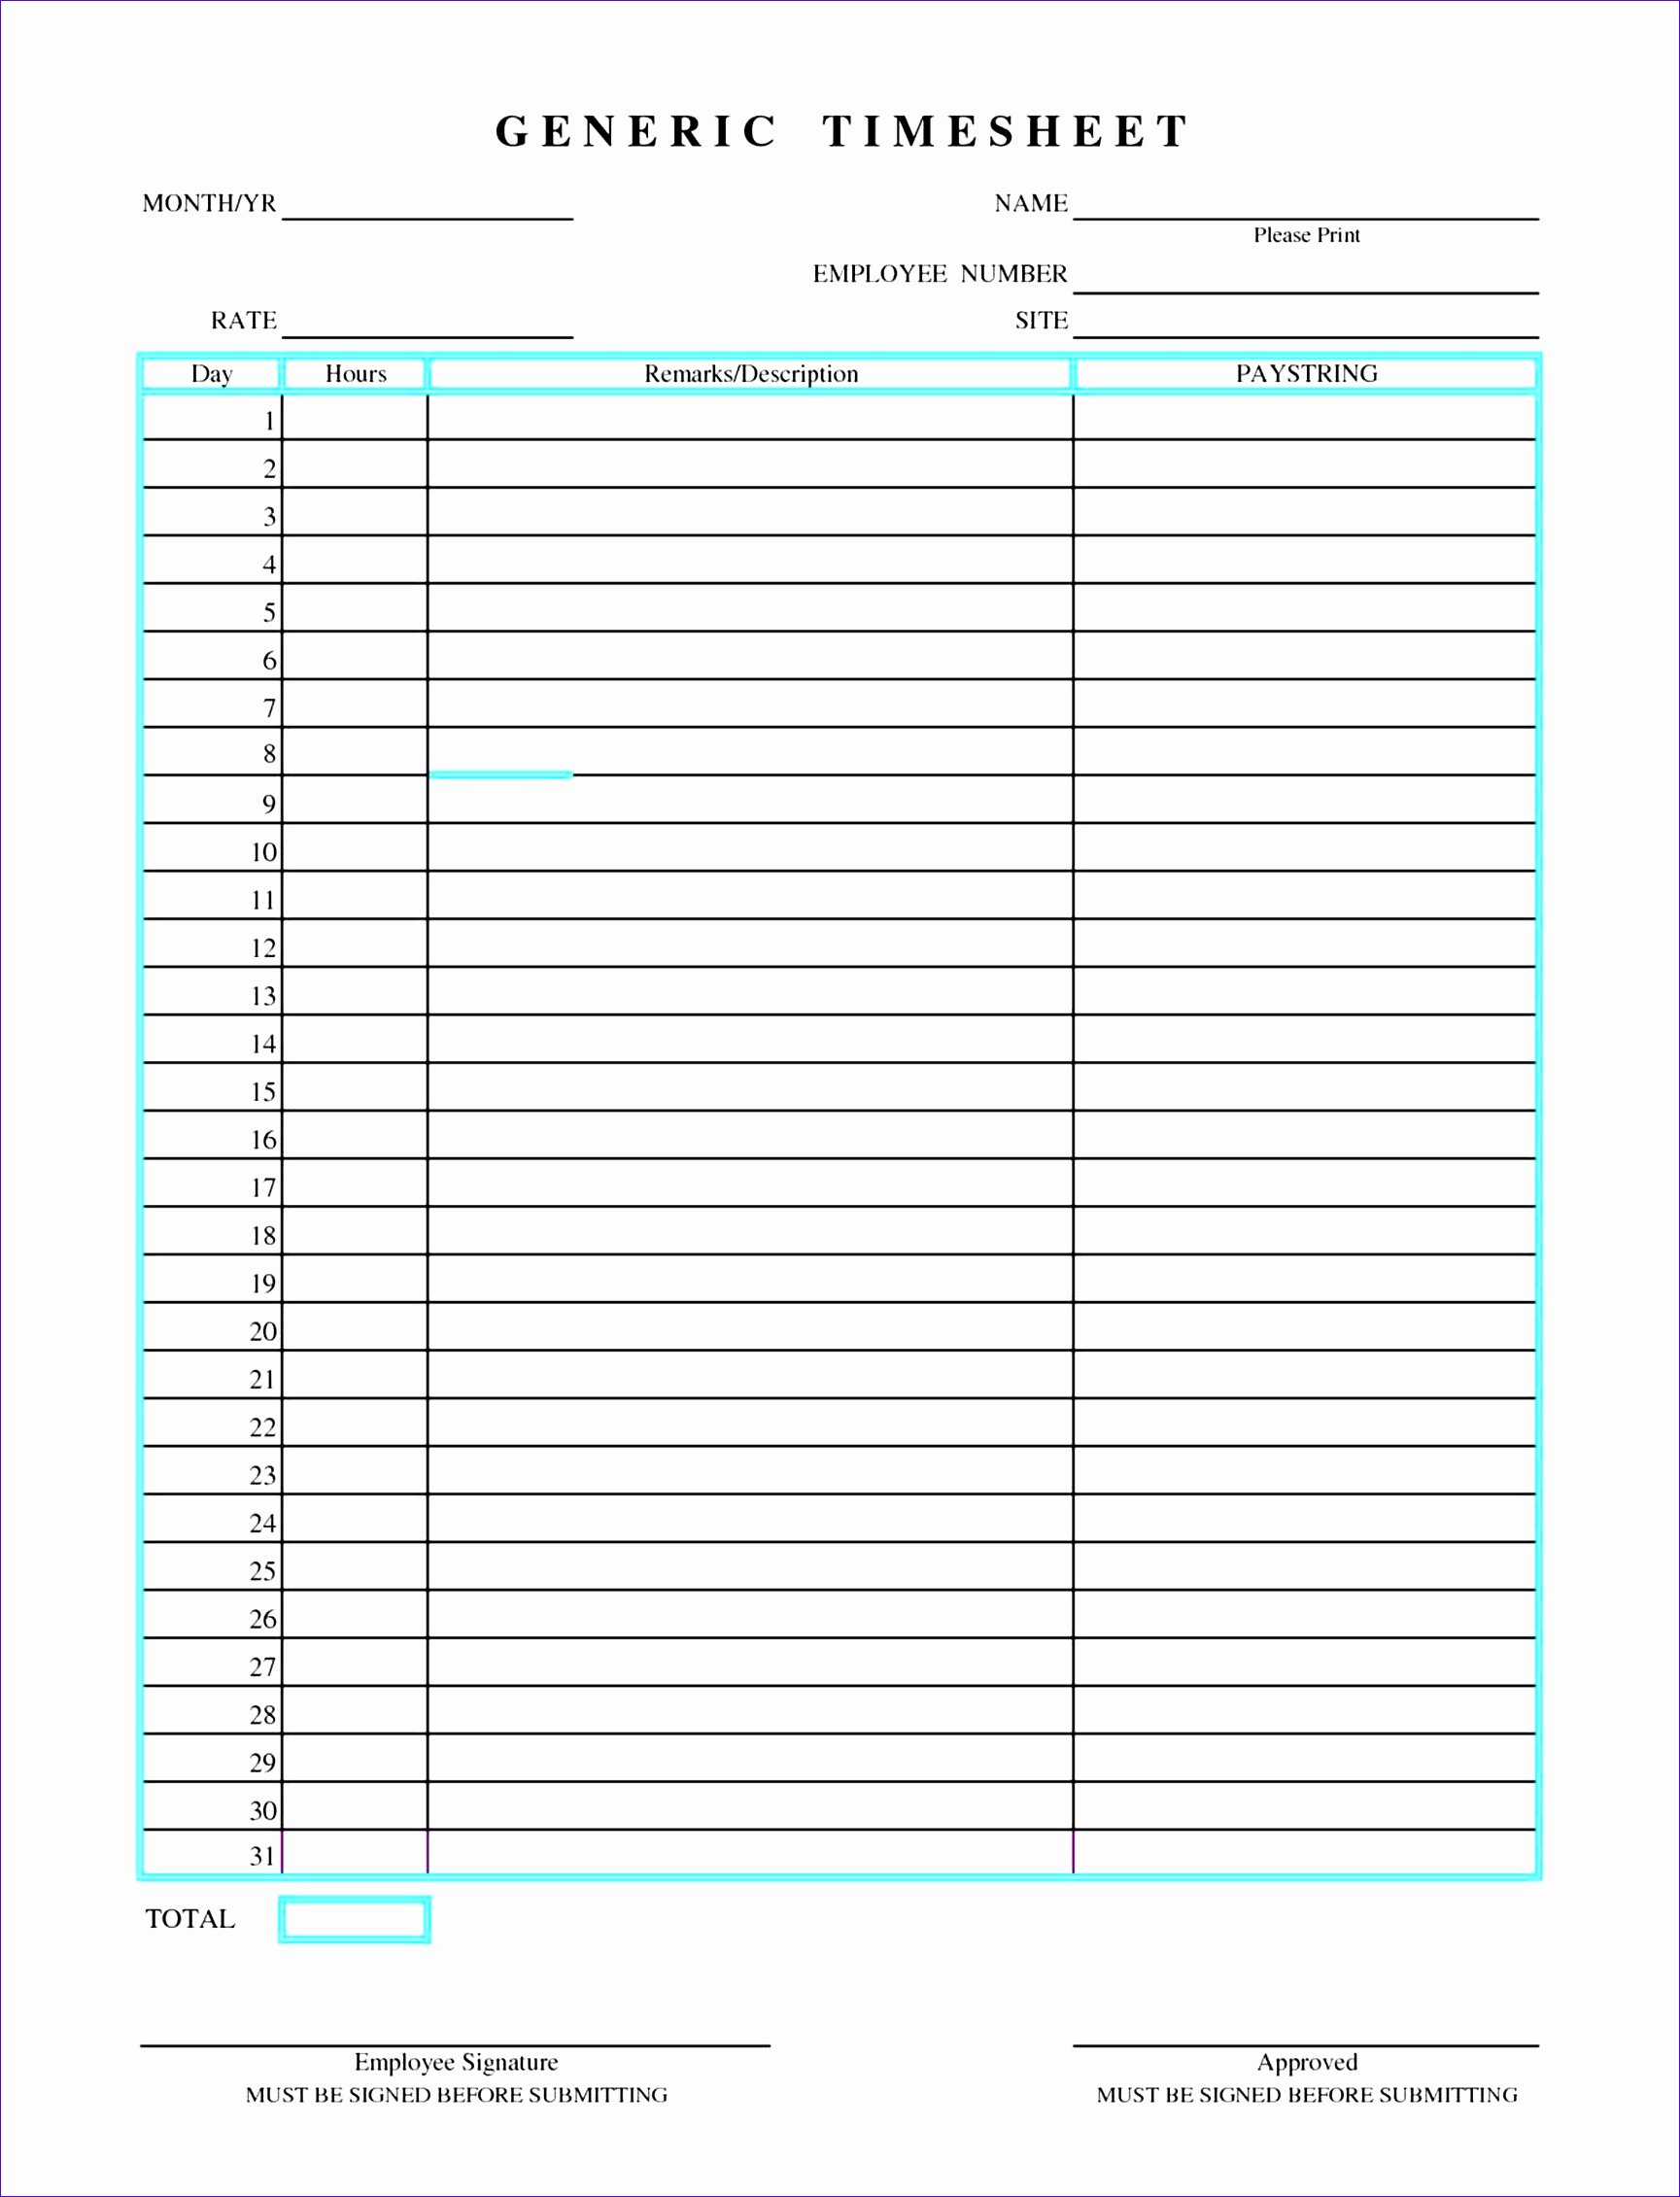 Timesheet Invoice Template Excel Elegant Timesheet Calculator Excel Template C3gar Awesome Work